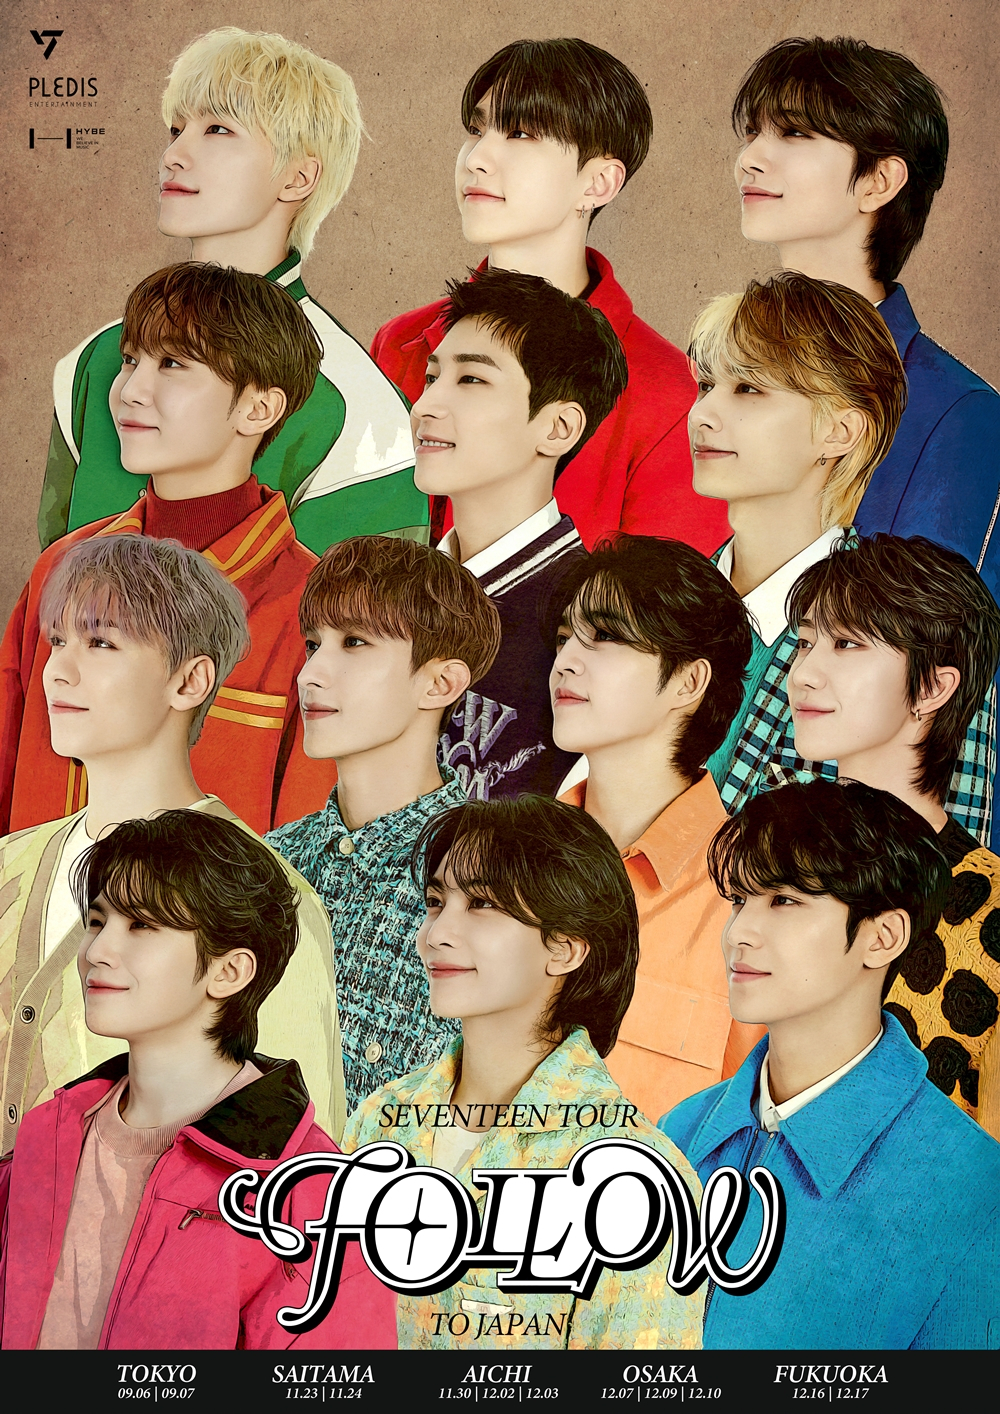 Seventeen to attract over 500,000 fans in Japan with 'Follow' dome